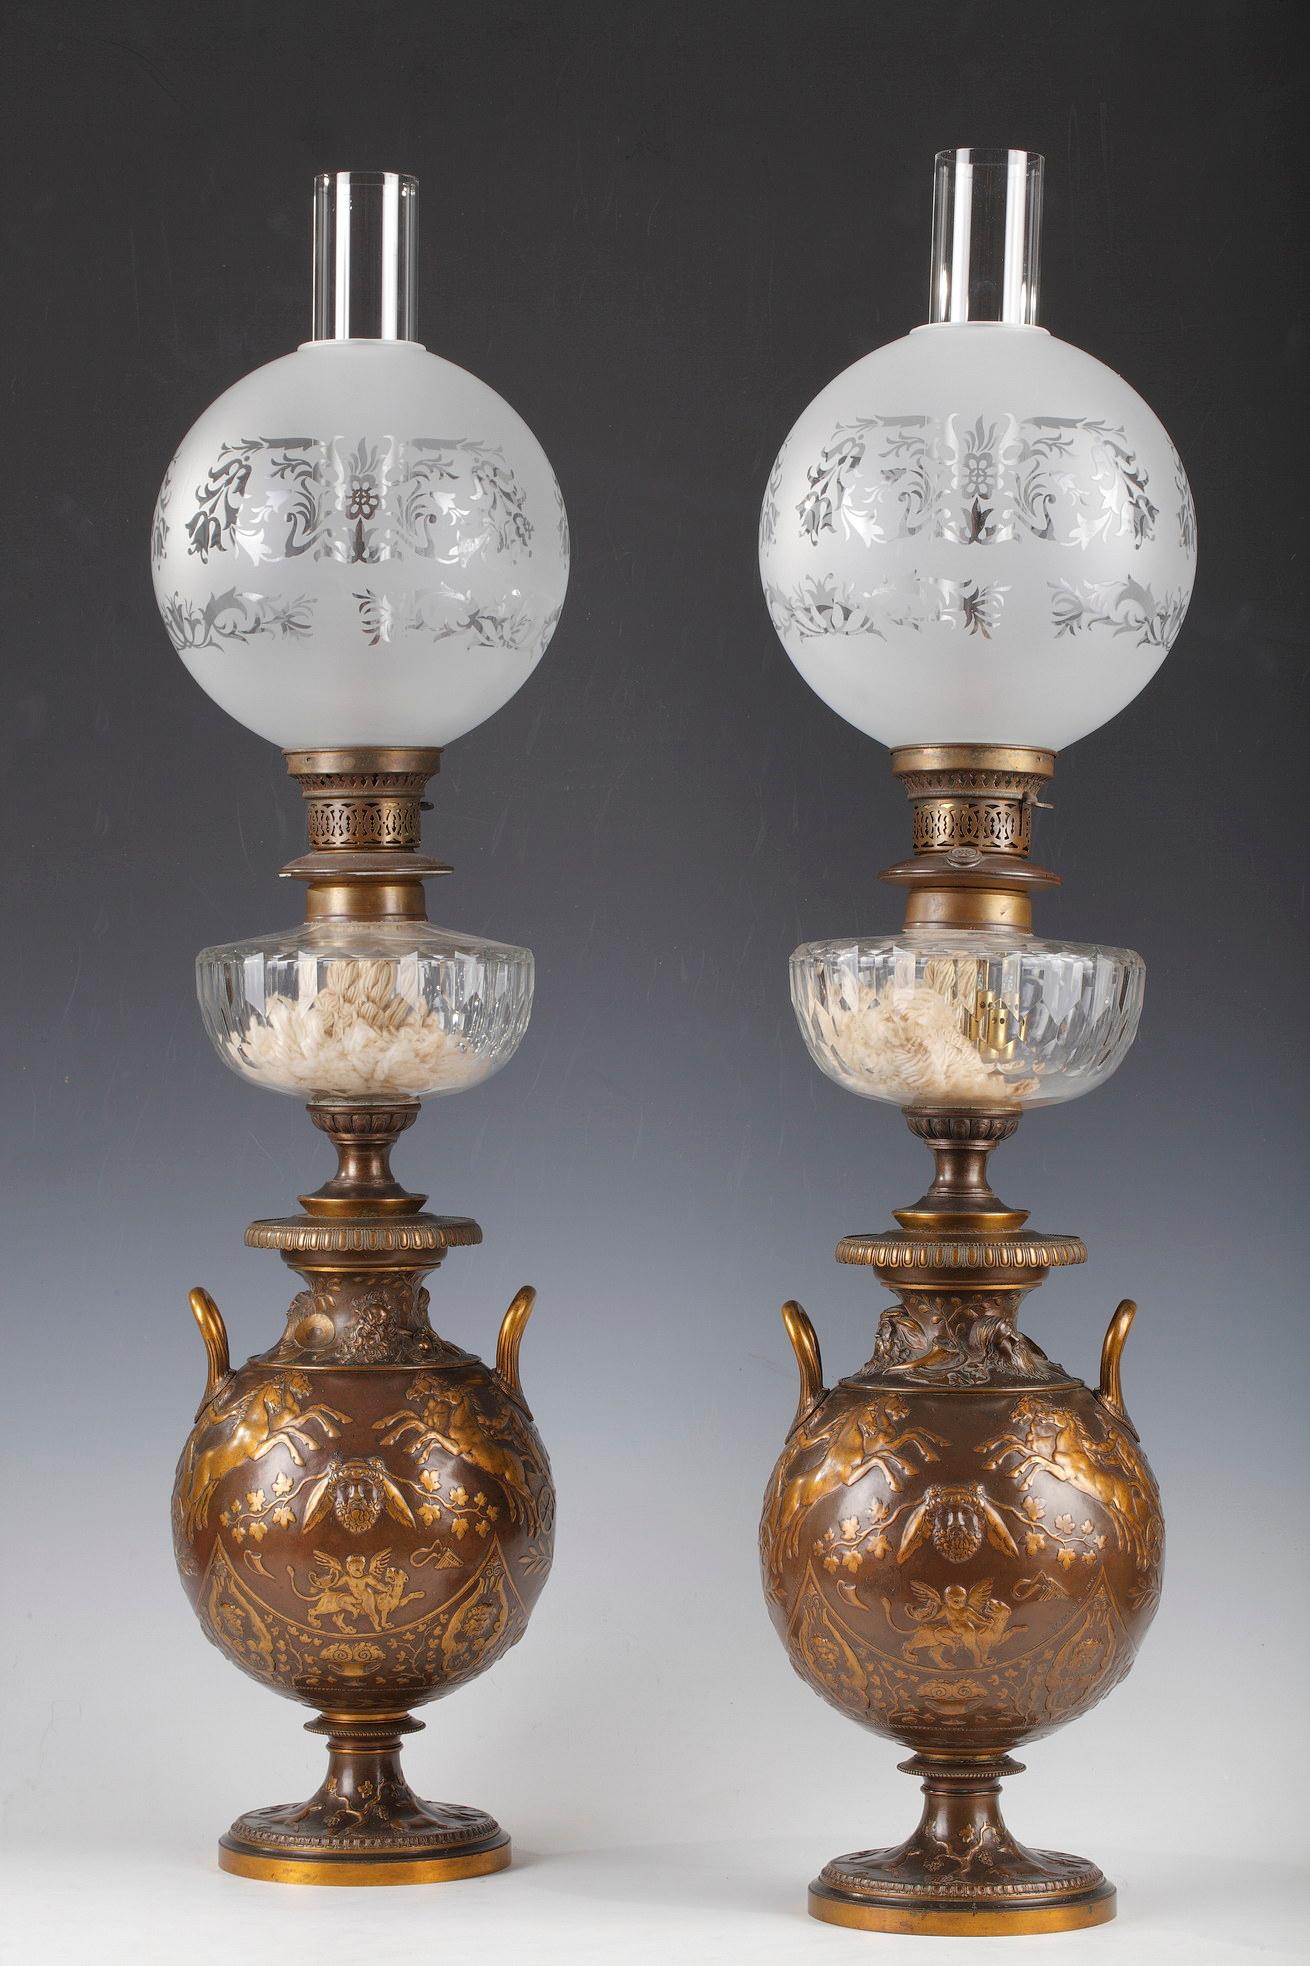 Signed F. Levillain inv. and F. Barbedienne

Pair of two patina bronze lamps made in shape of ancient vases. A rich decor made in low-relief depicts scenes in the ancient style, such as gods riding their chariots and cupids holding up cups and